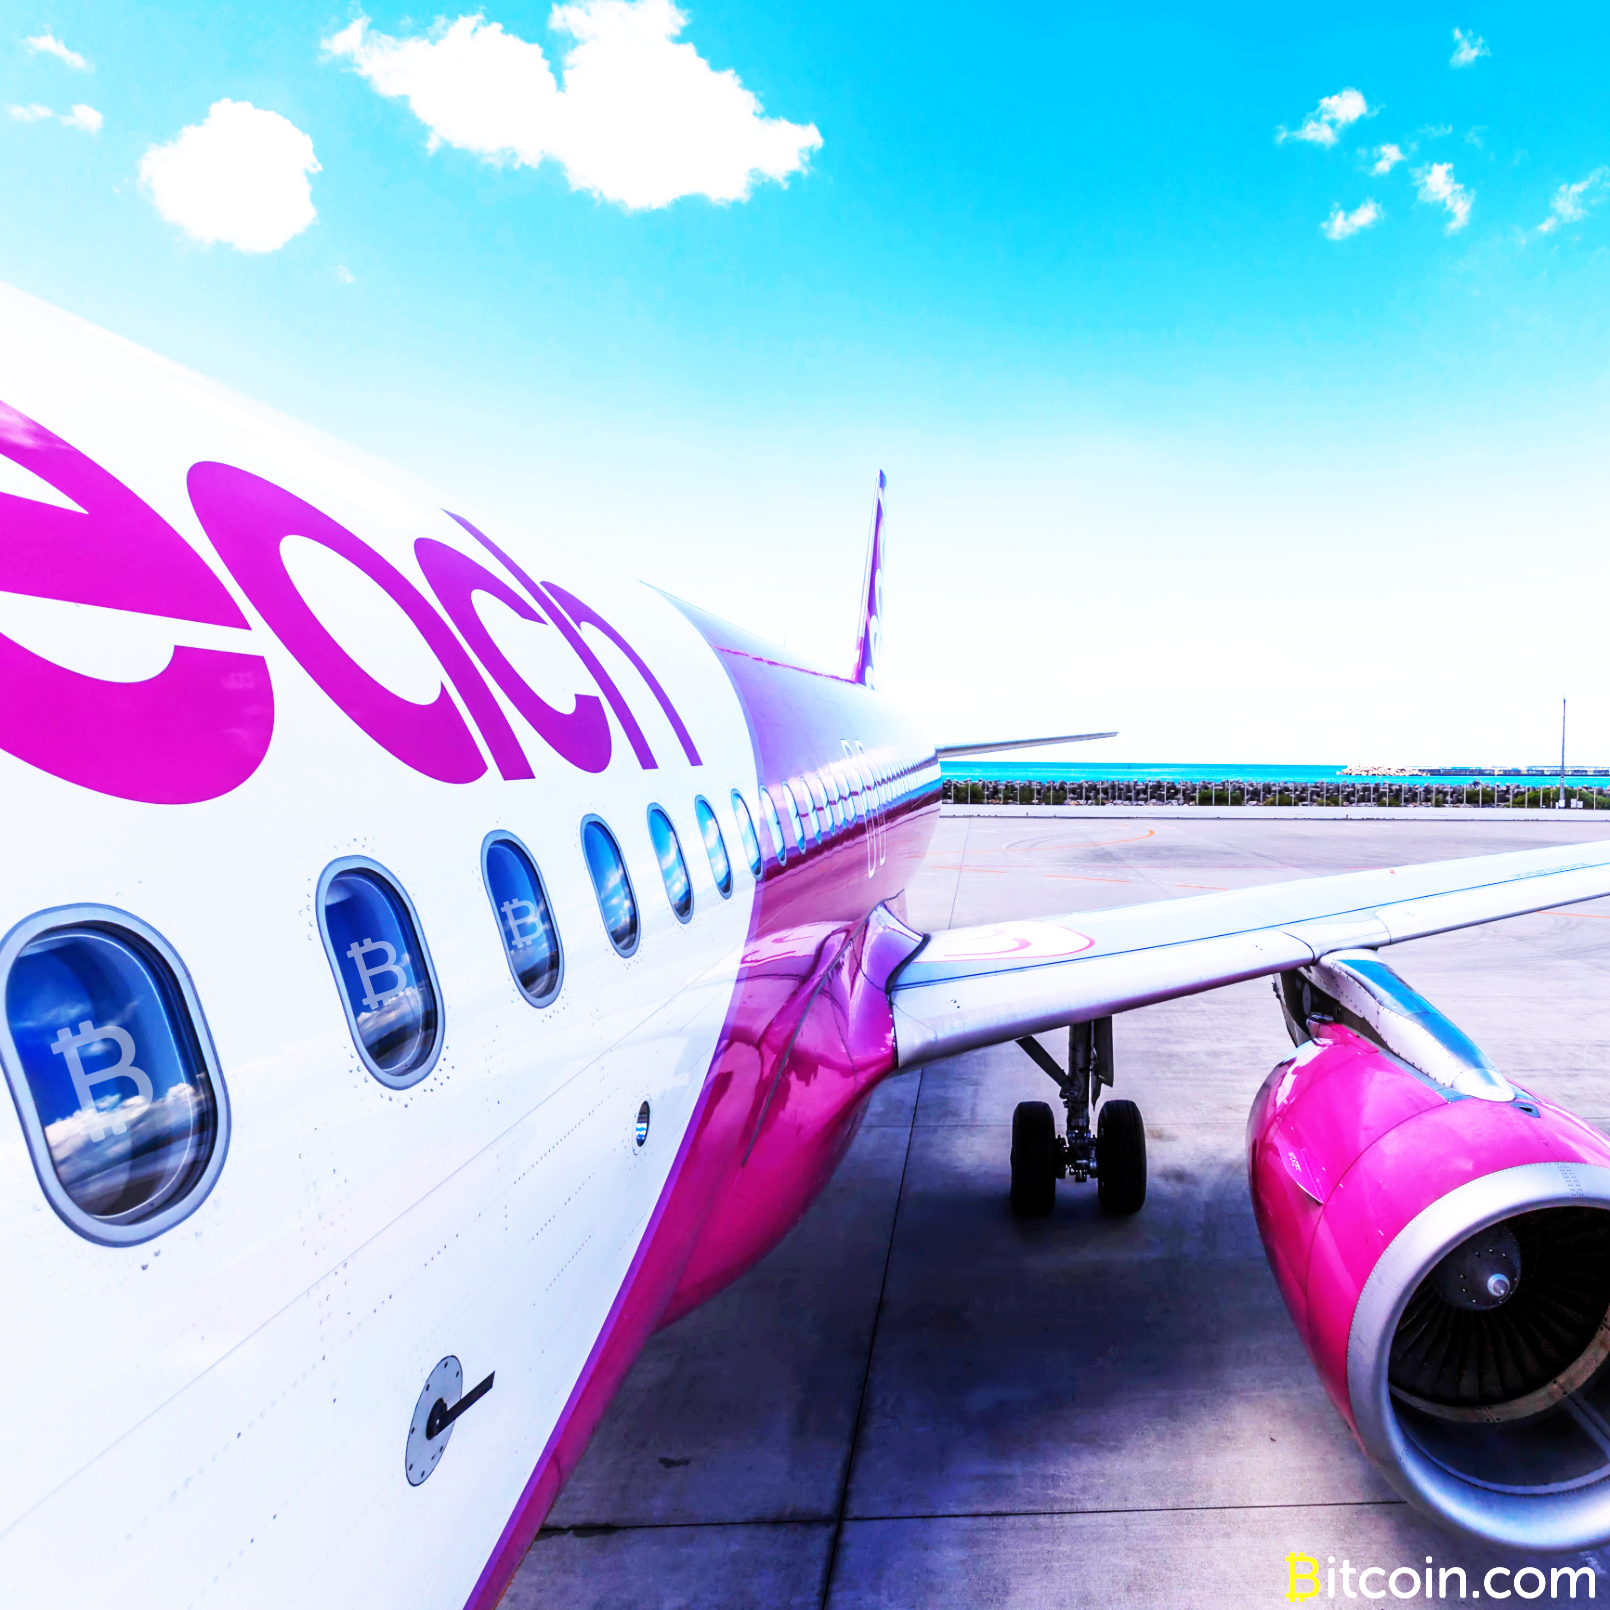 Japan's Leading Low-Cost Airline Clarifies Plan to Accept Bitcoin